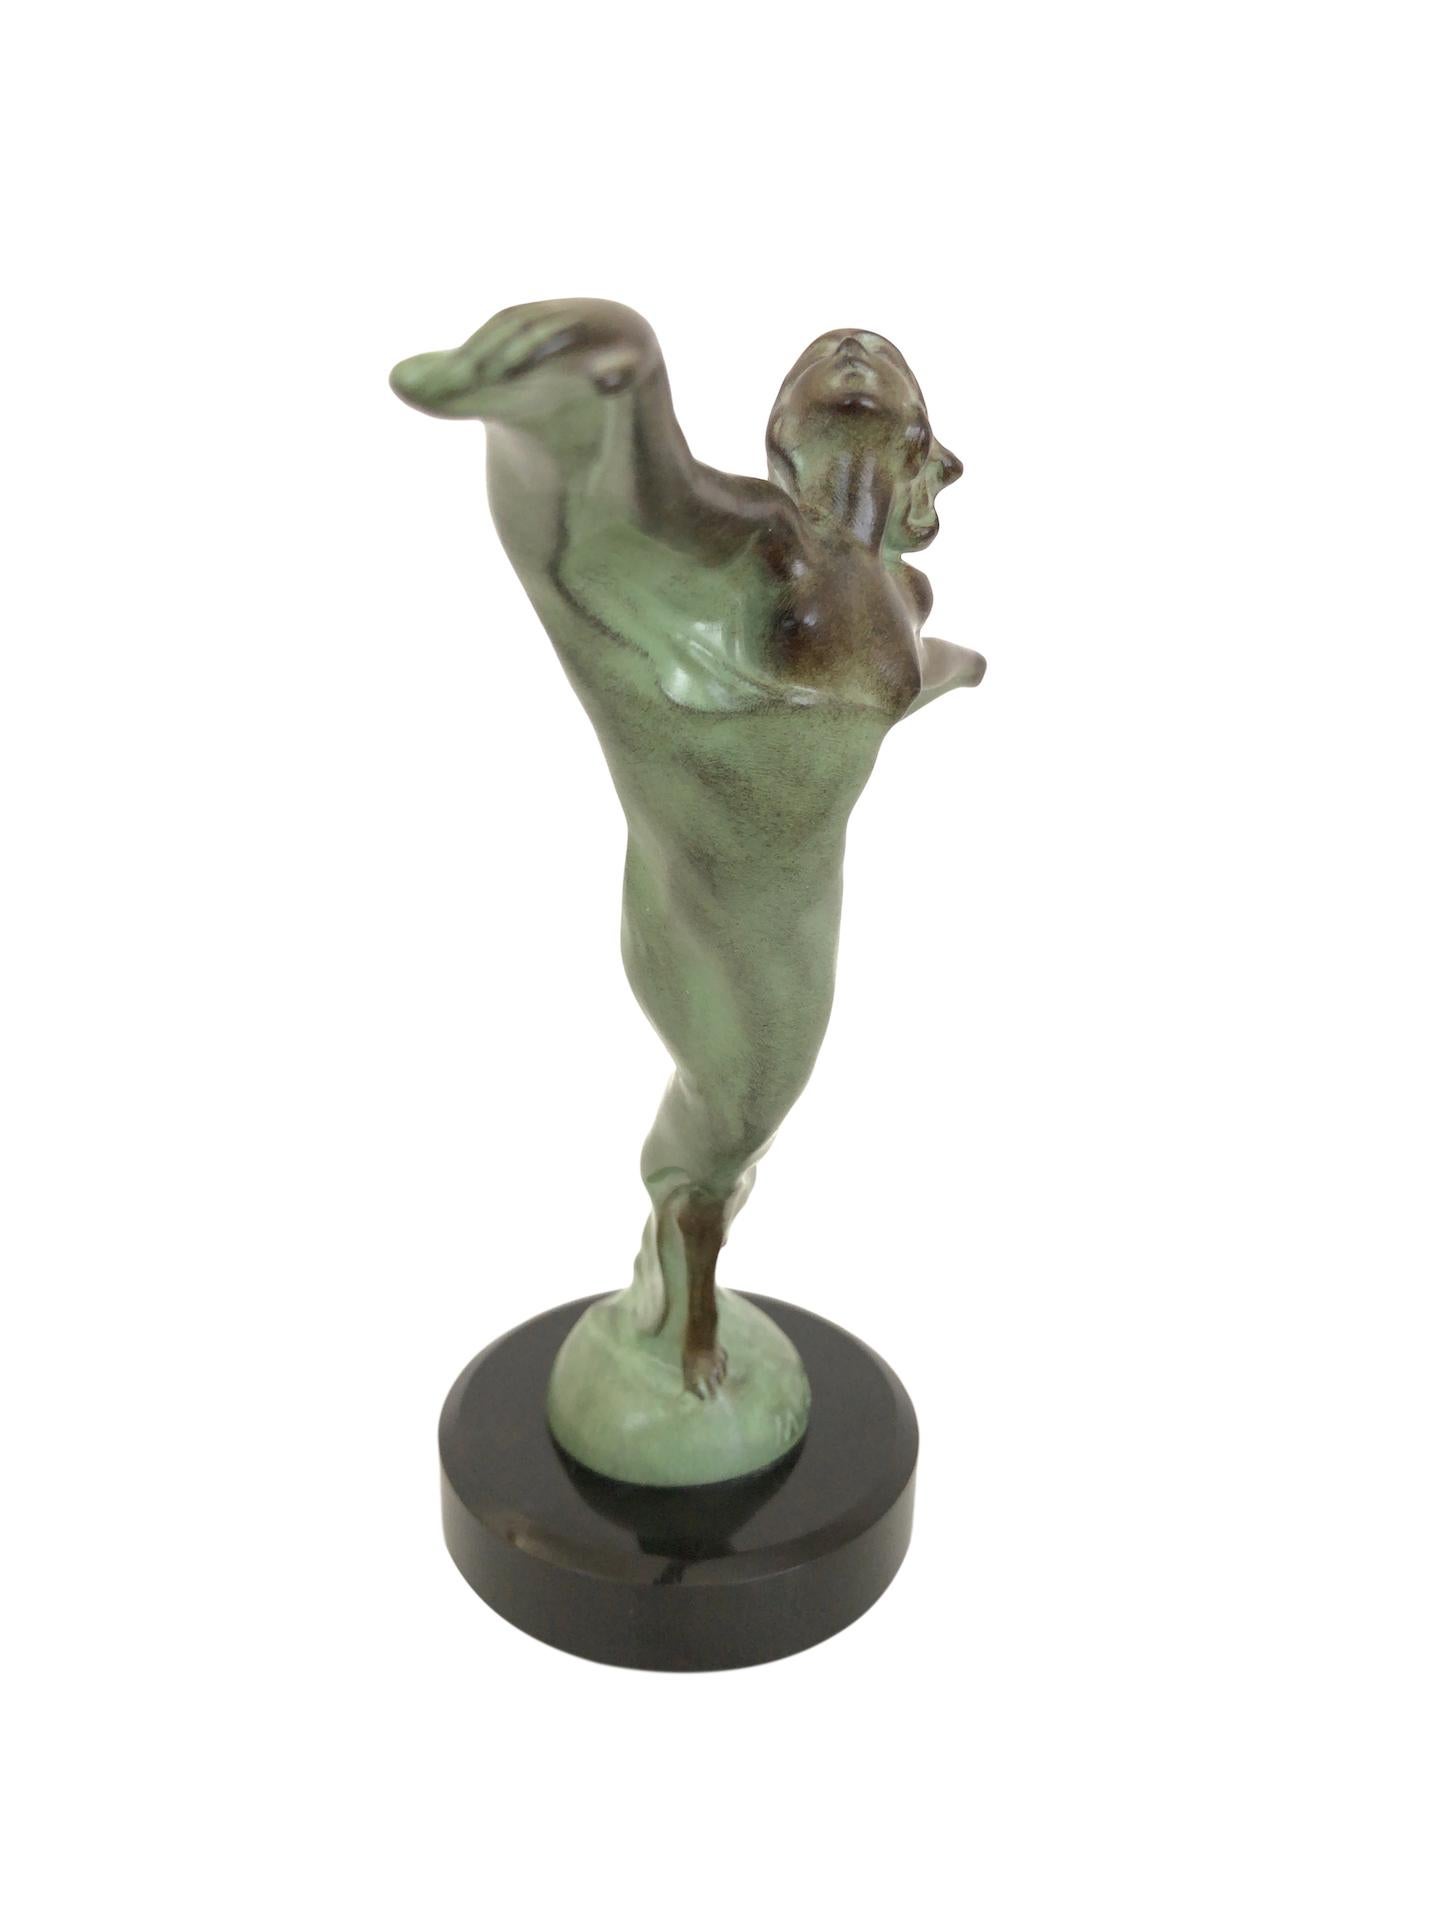 Spelter Sculpture Envol Dancer French Art Deco Style Radiator Mascot from Max Le Verrier